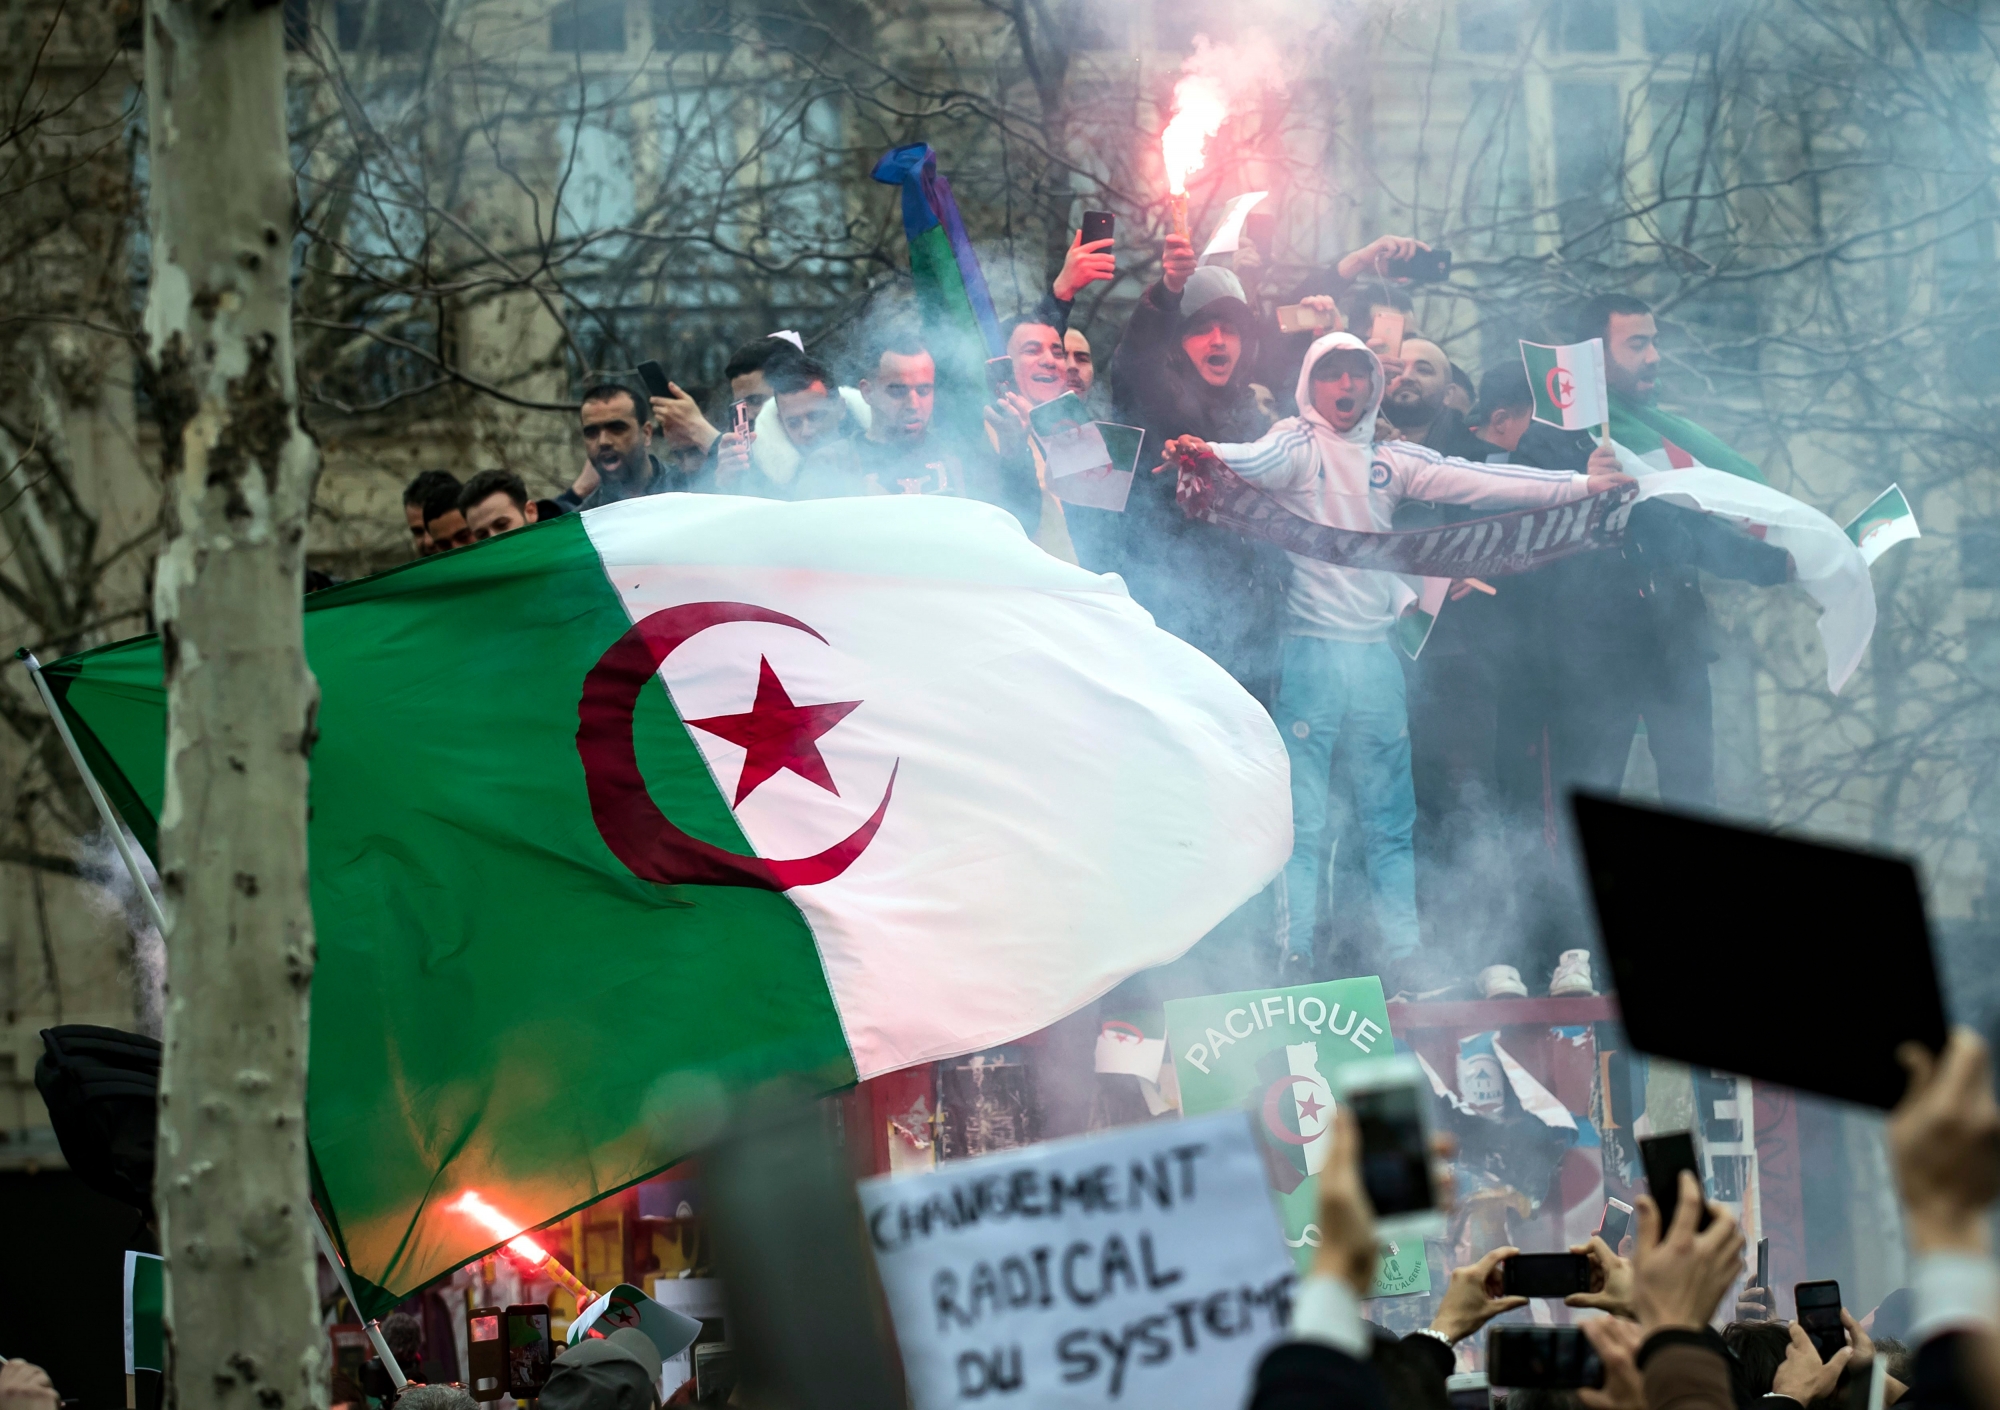 epa07411041 Members of the Algerian community in Paris protest against the fifth term of Algerian President Abdelaziz Bouteflika on Place de la Republique in Paris, France, 03 March 2019. The registration process for the upcoming presidential elections in Algeria closed on 03 March, while there was still no official confirmation as to whether the country's ailing president, whose bid for re-election sparked widespread protests, had submitted his candidacy papers. Abdelaziz Bouteflika, serving as the president since 1999, has announced on 19 February he will be running for a fifth term in presidential elections scheduled for 18 April 2019.  EPA/IAN LANGSDON FRANCE ALGERIA PROTEST BOUTEFLIKA